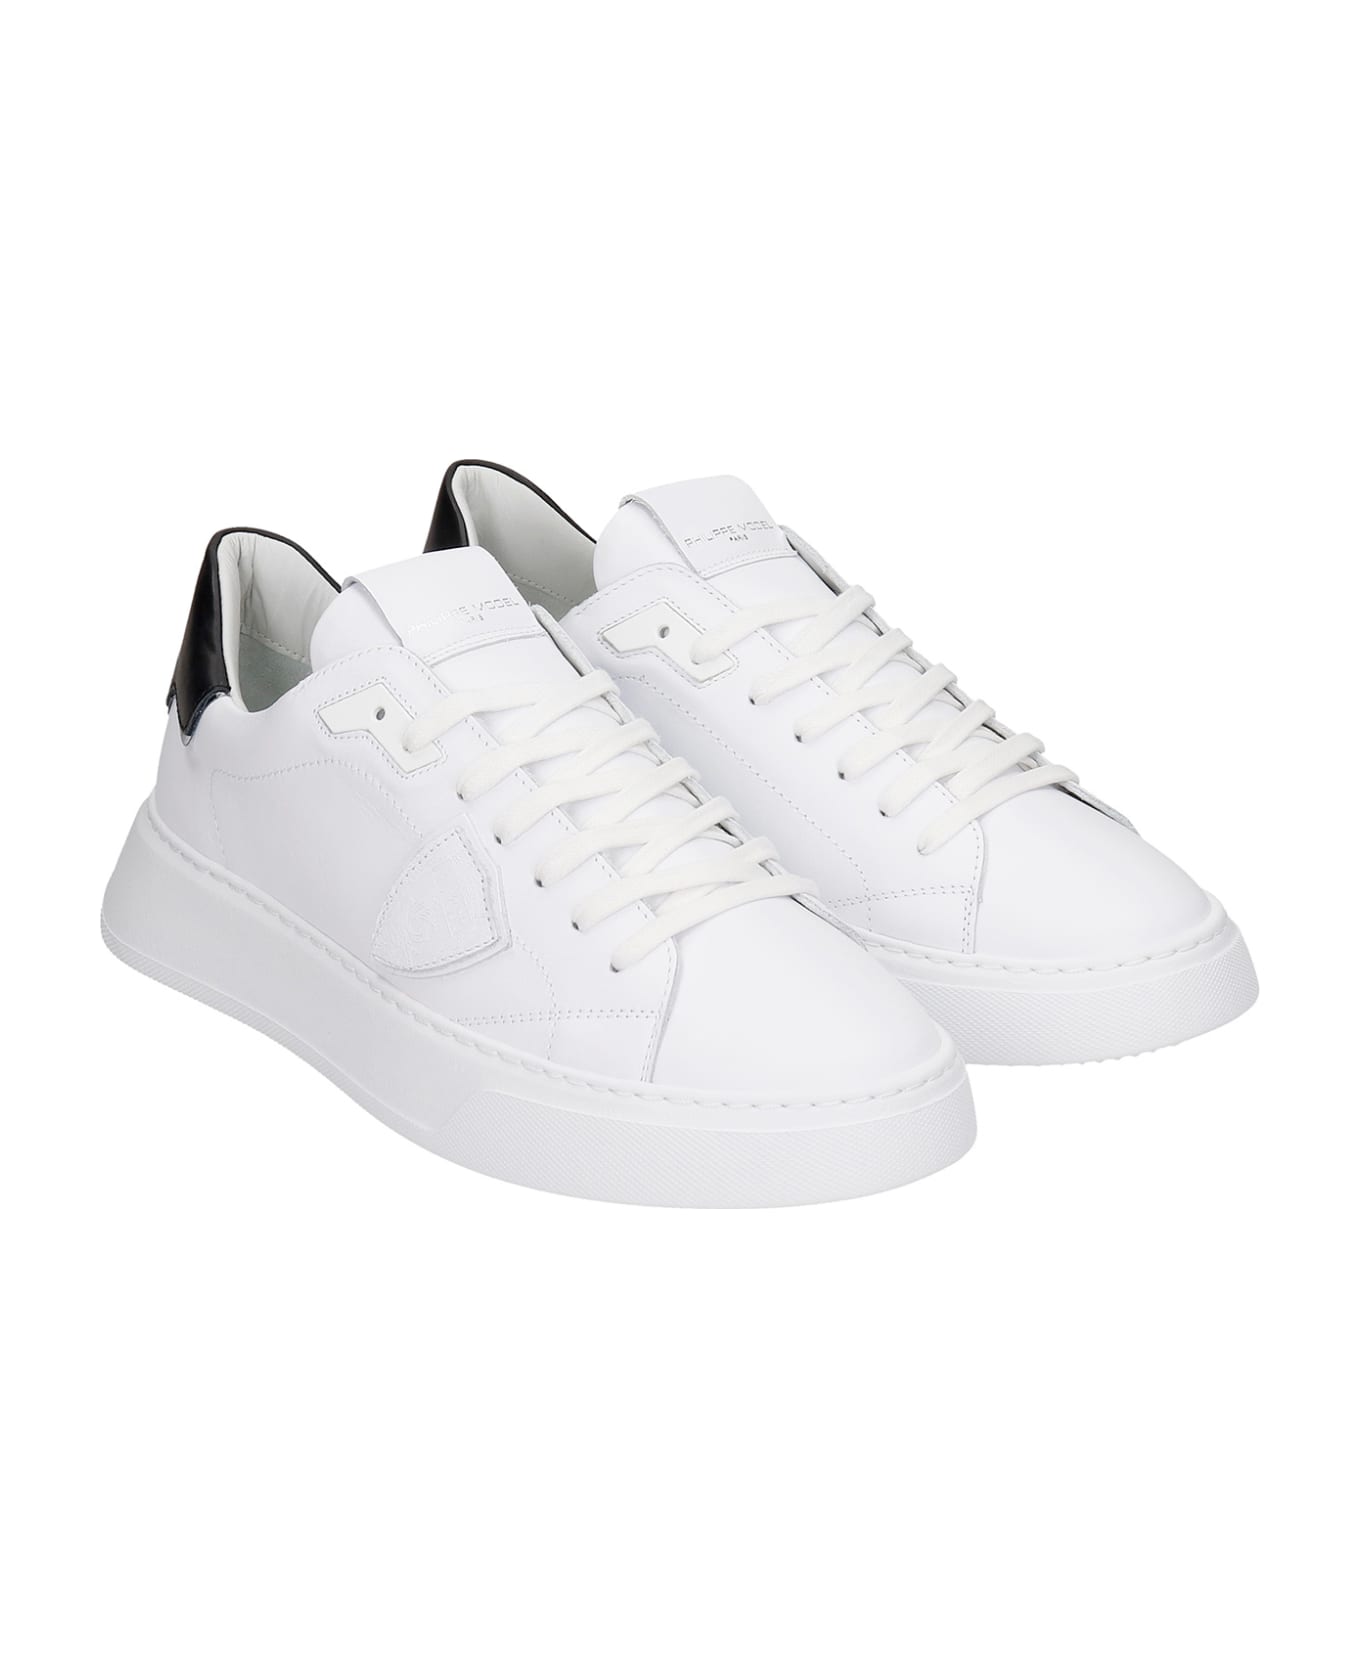 Philippe Model Temple Sneakers In White Leather - Veau Blanc Noir